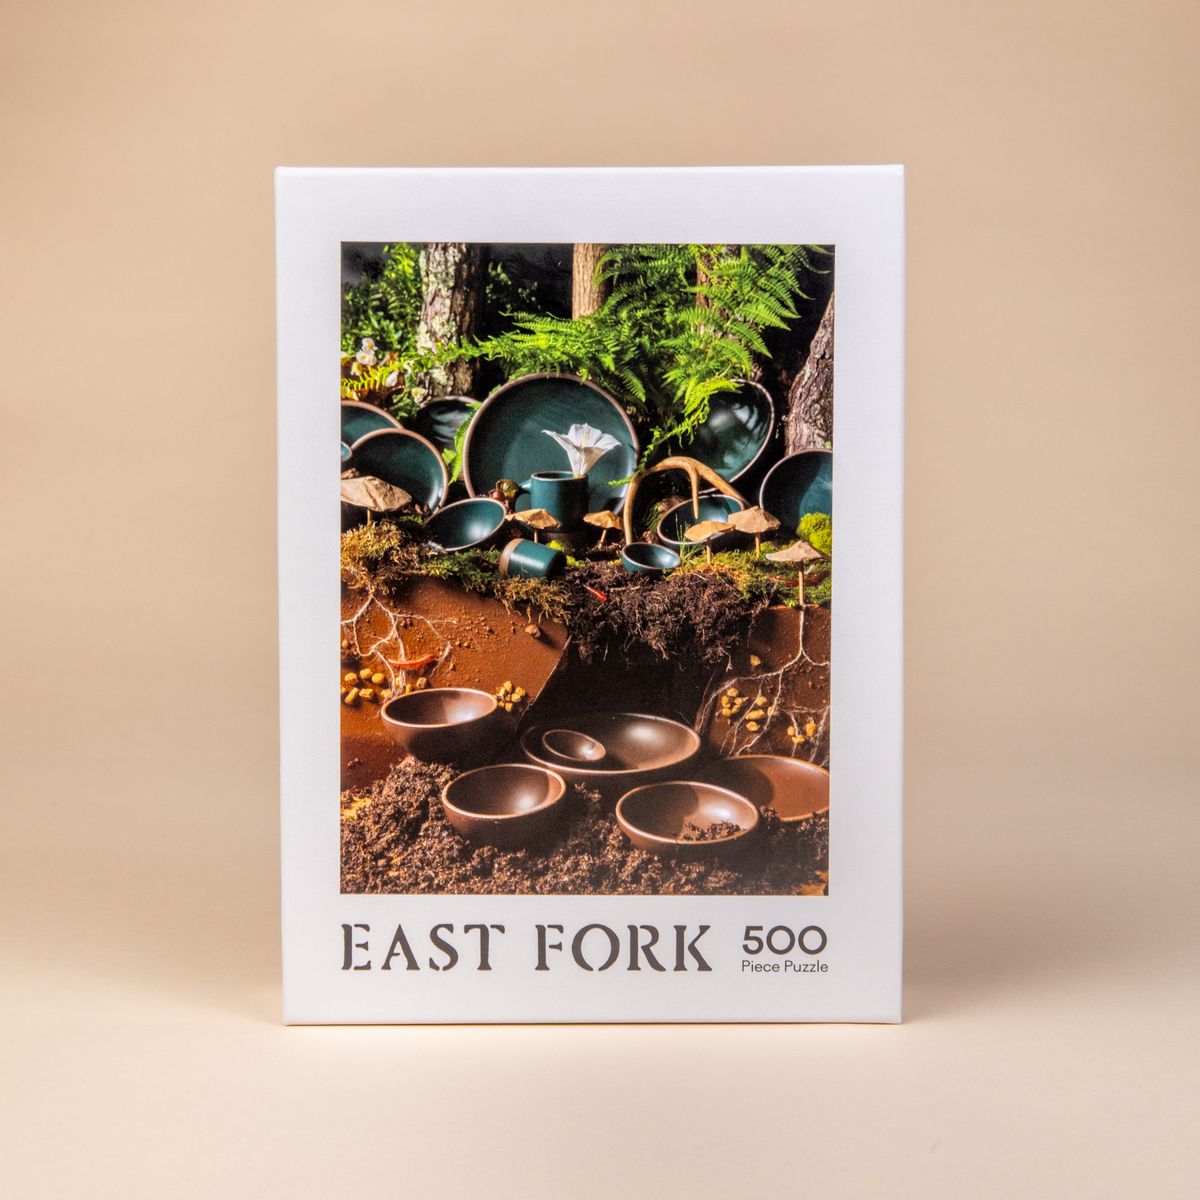 The front of the box of a 500-piece jigsaw puzzle that when put together shows ceramic bowls, plates and mugs in dark teal and brown colors in a natural forest setting.